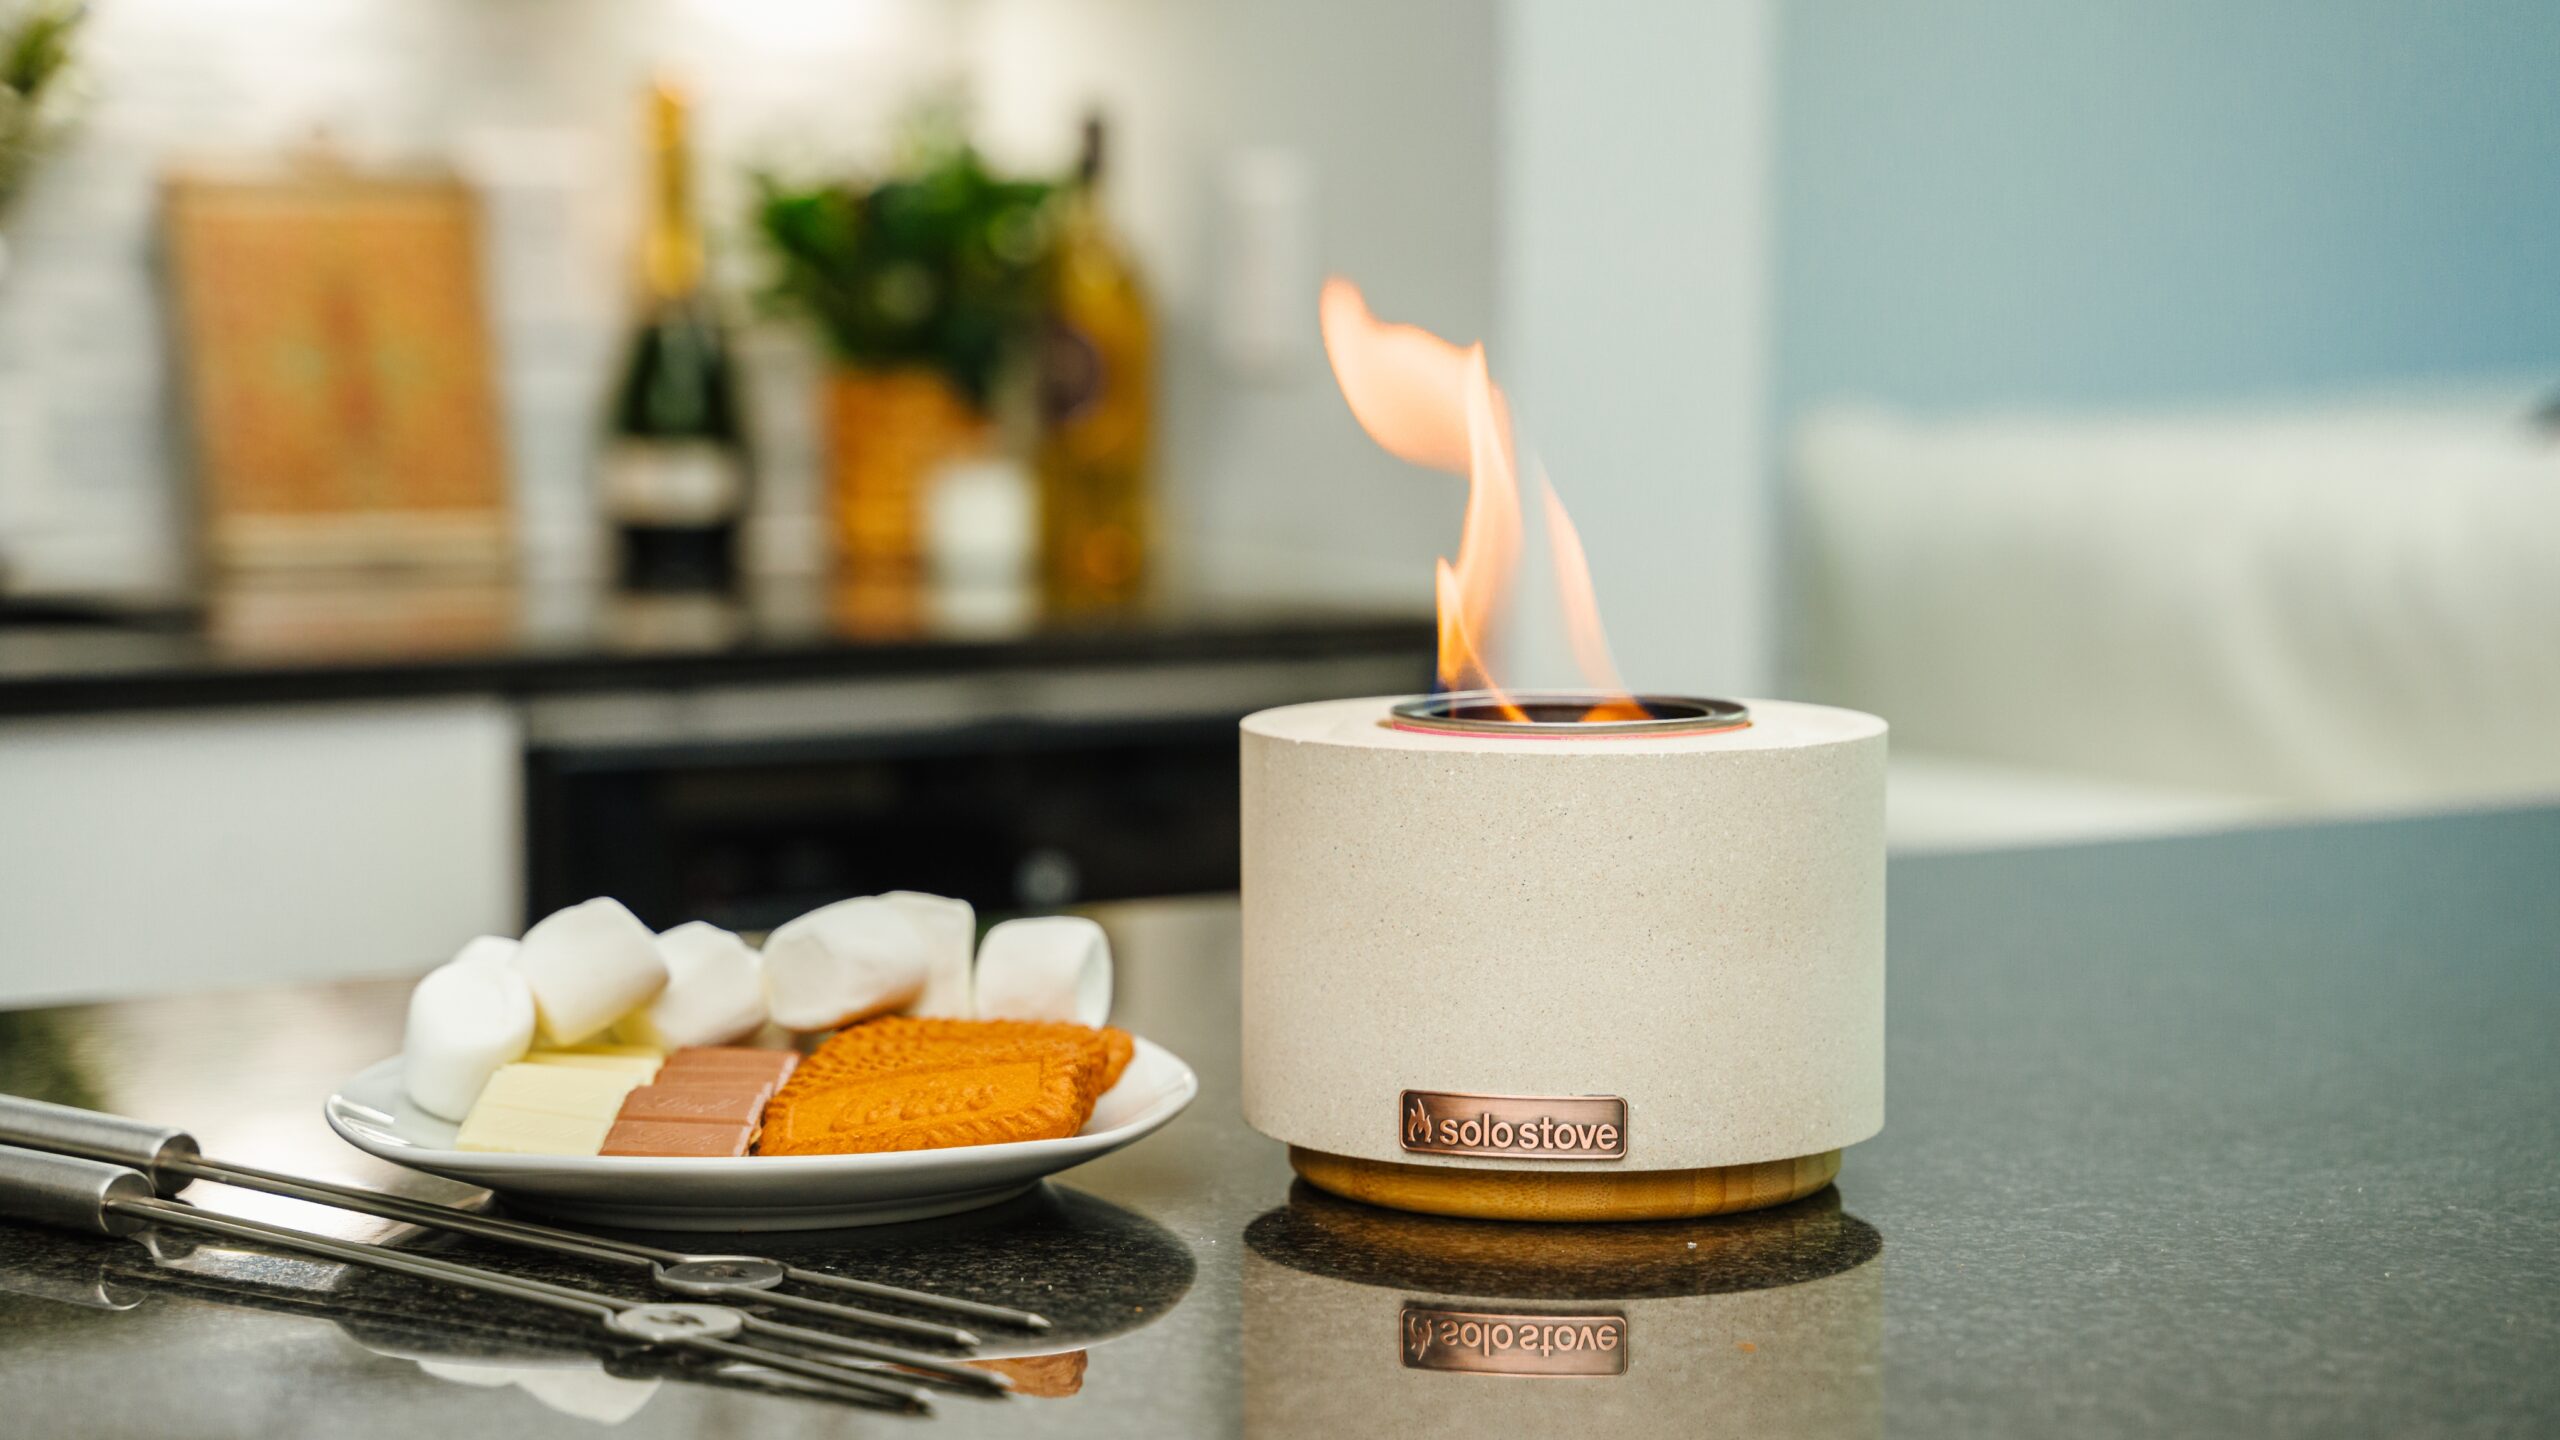 Cozy On the Countertops: Solo Stove's New Cinder Indoor Fire Feature